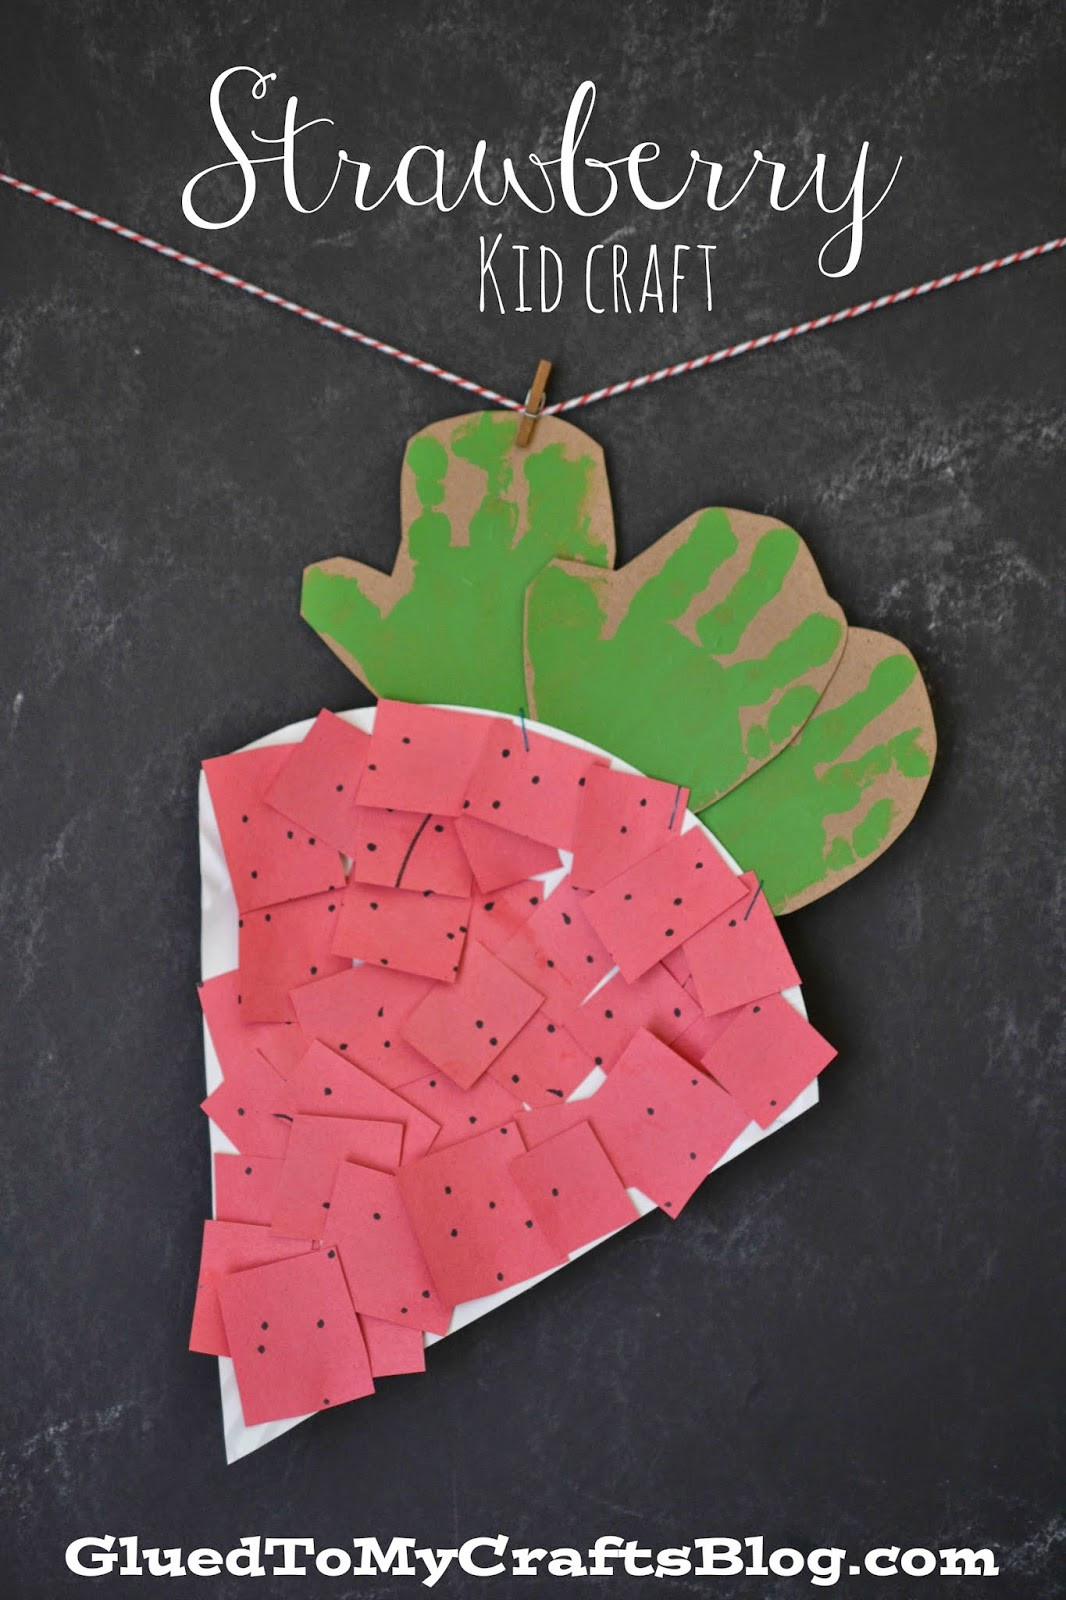 Toddlers Art And Craft Ideas
 Paper Plate Strawberry Kid Craft Glued To My Crafts